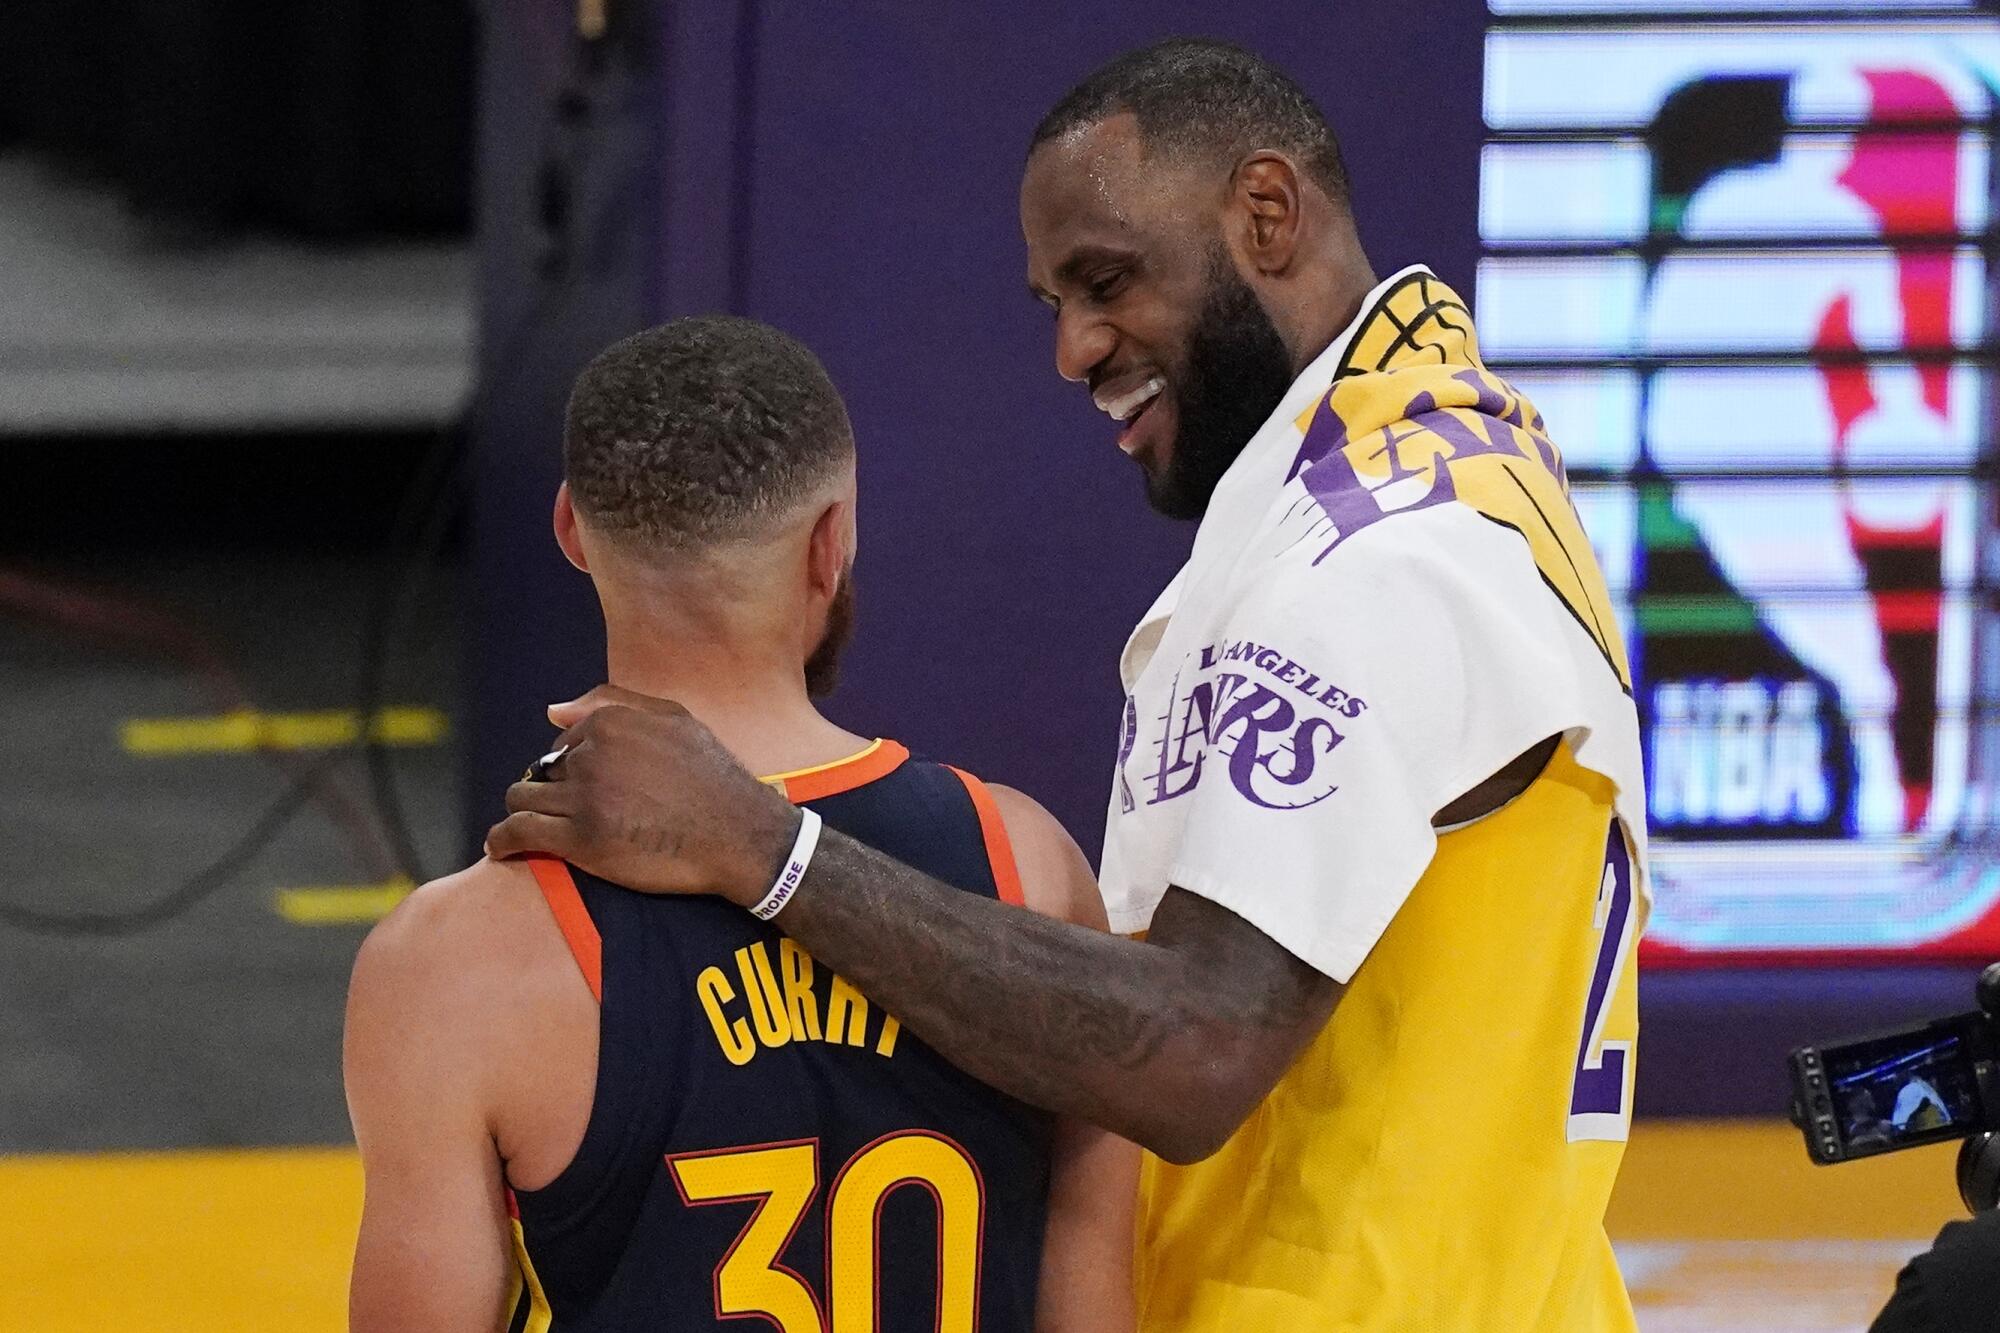 Los Angeles Lakers forward LeBron James, right, greets Golden State Warriors guard Stephen Curry.